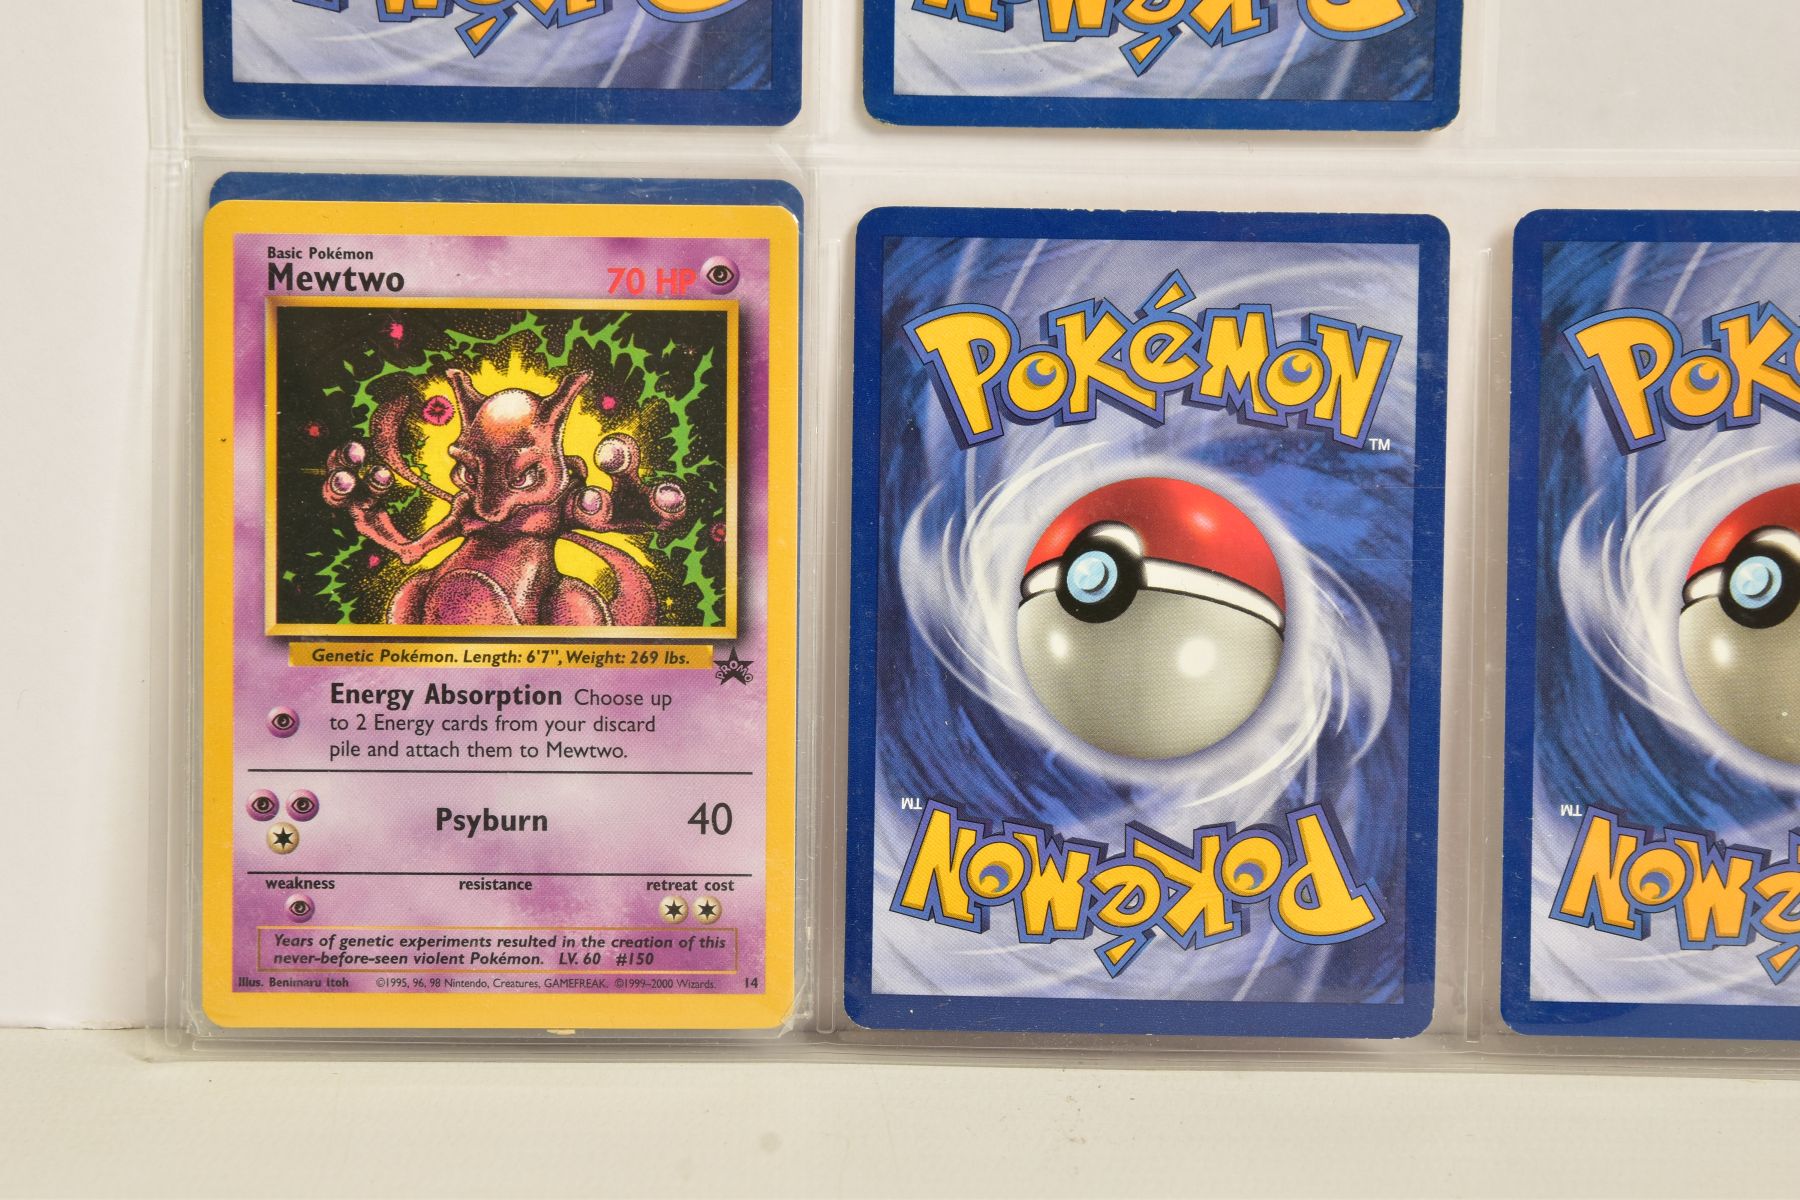 A QUANTITY OF POKEMON TCG CARDS, cards are assorted from Base Set, Base Set 2, Jungle, Fossil, - Image 35 of 46